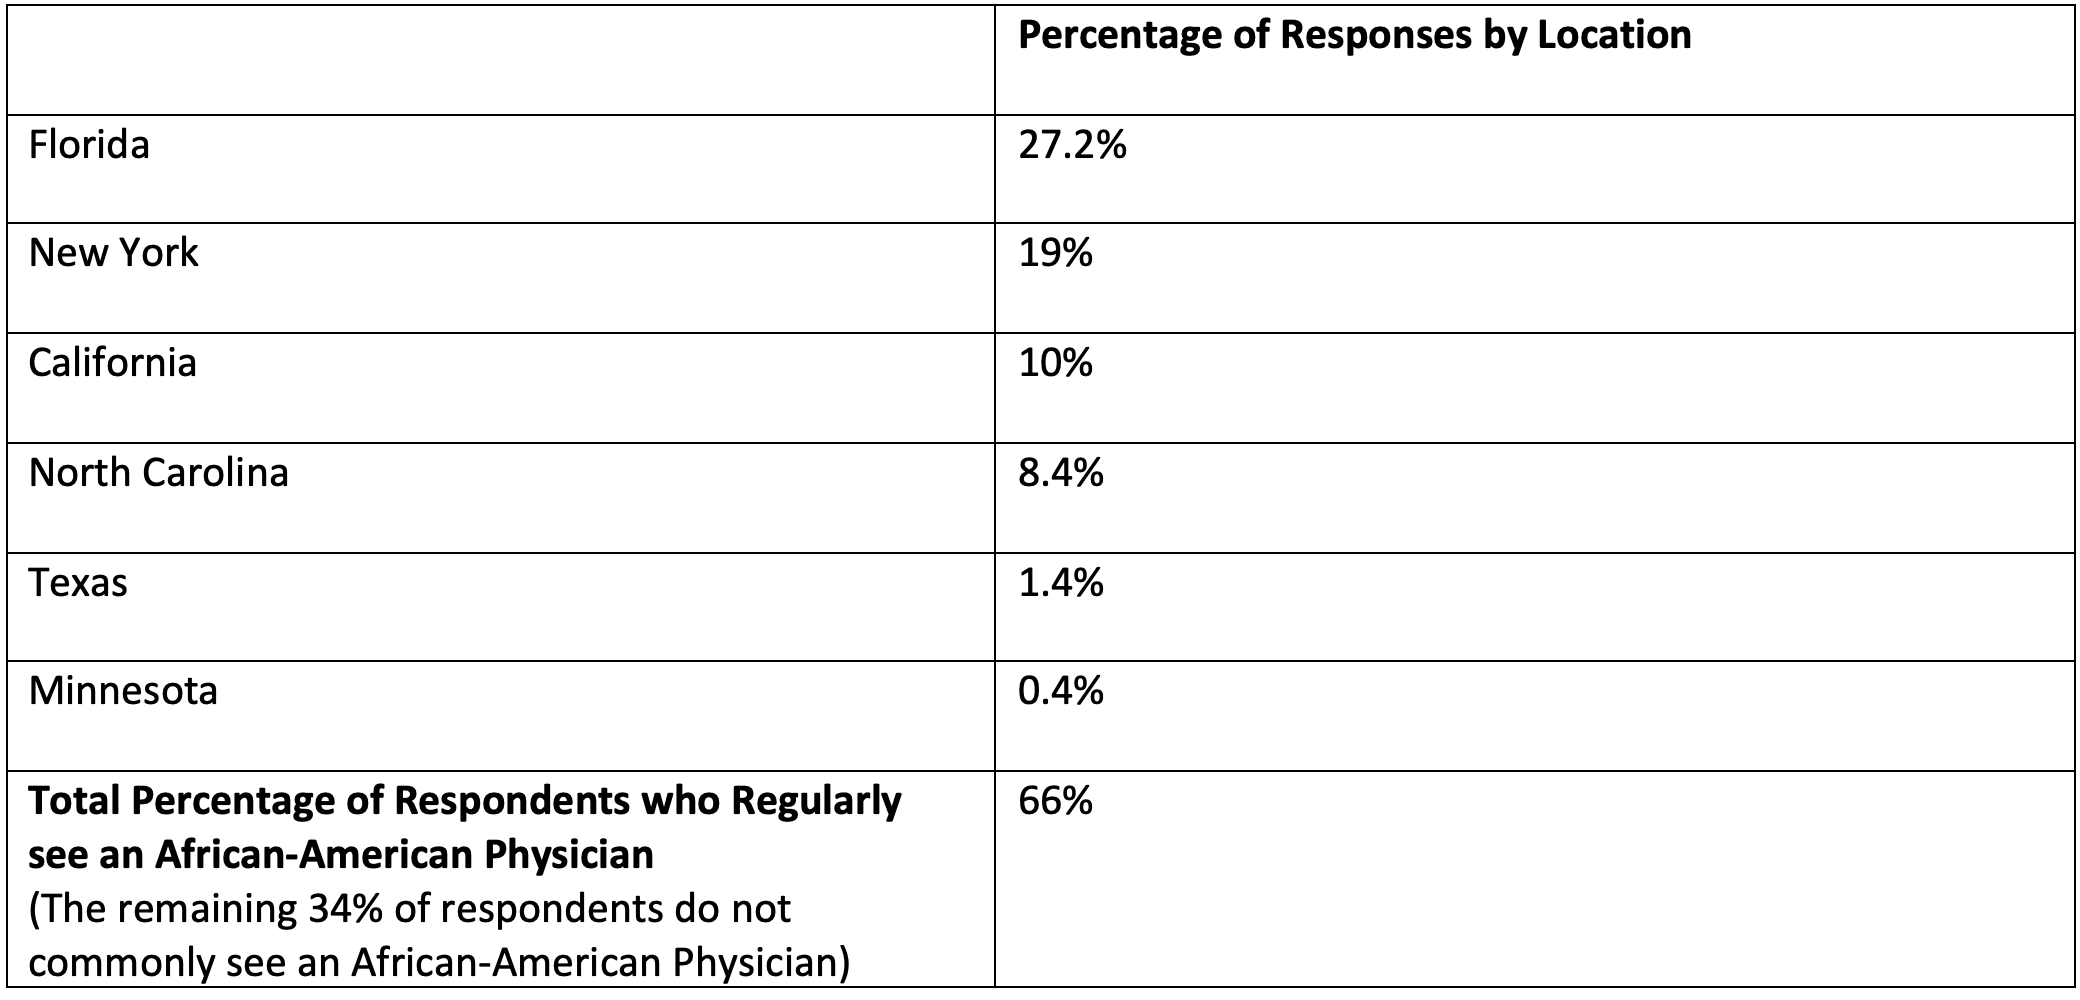 TABLE 6: Top US States Where Respondents Report Seeing an African-American Physician on a Regular Basis